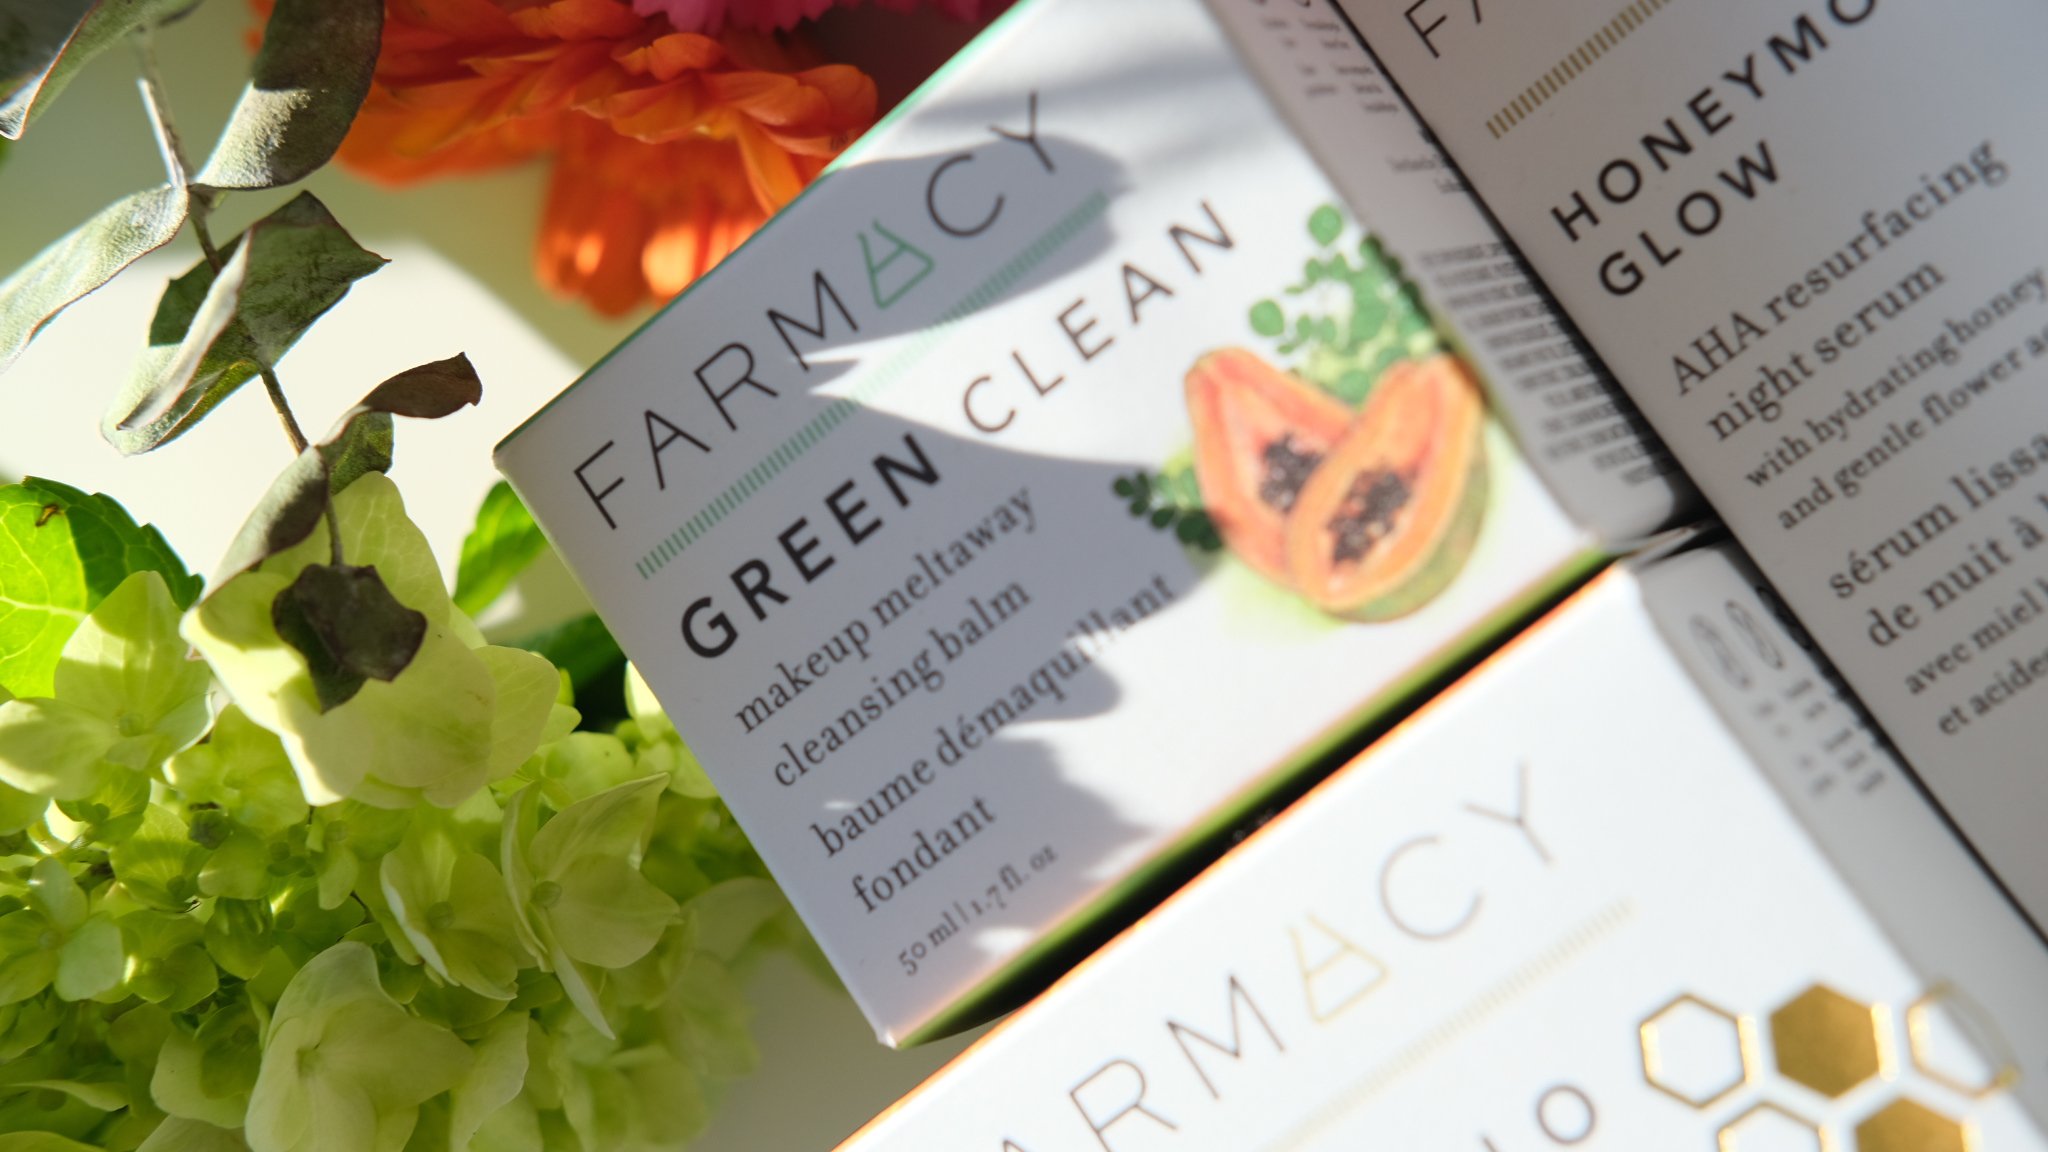 In this Farmacy beauty review, I have included:  A Farmacy green clean cleansing balm review  A Farmacy honeymoon glow review  A Farmacy daily greens moisturizer review  A Farmacy 10% Niacinamide night mask review  A Farmacy Honey Potion mask review